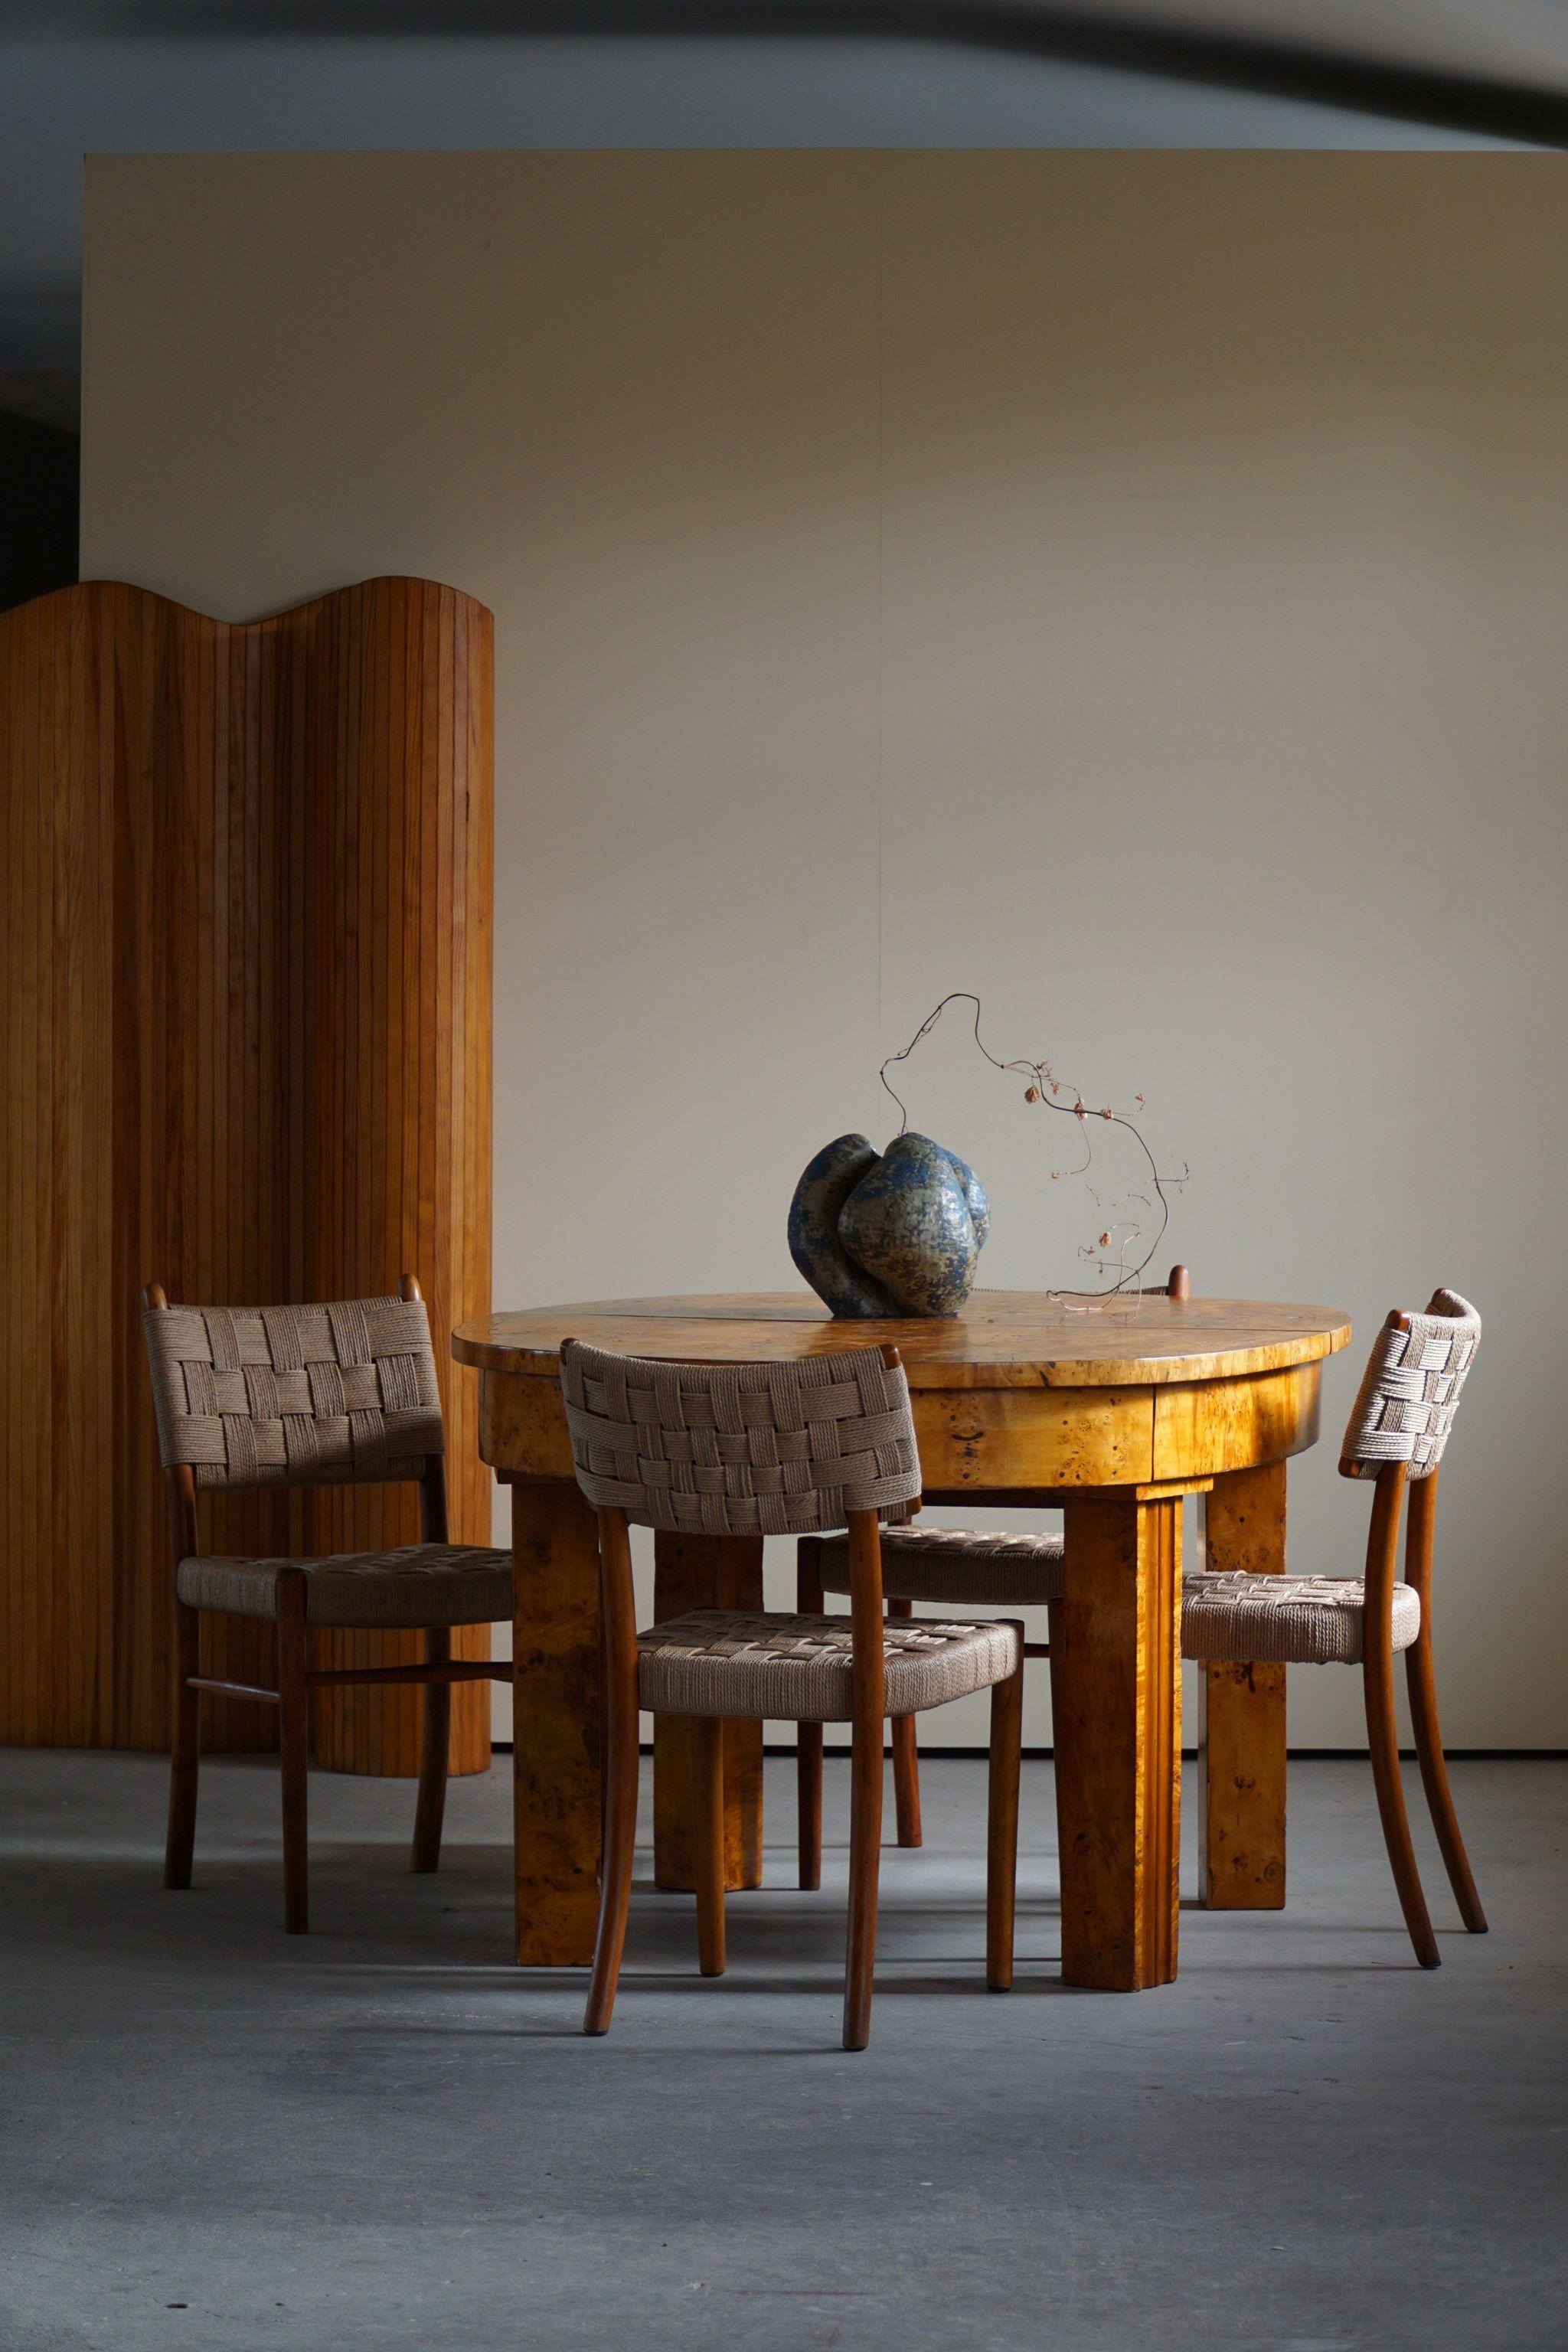 Rare set of 8 dining chairs made in bentwood and reupholstered seat and back in paper cord. Very good vintage condition, with few signs of wear.
Designed by Karl Schröder for Fritz Hansen in 1930s, model 1462 & 1572.

These chairs will